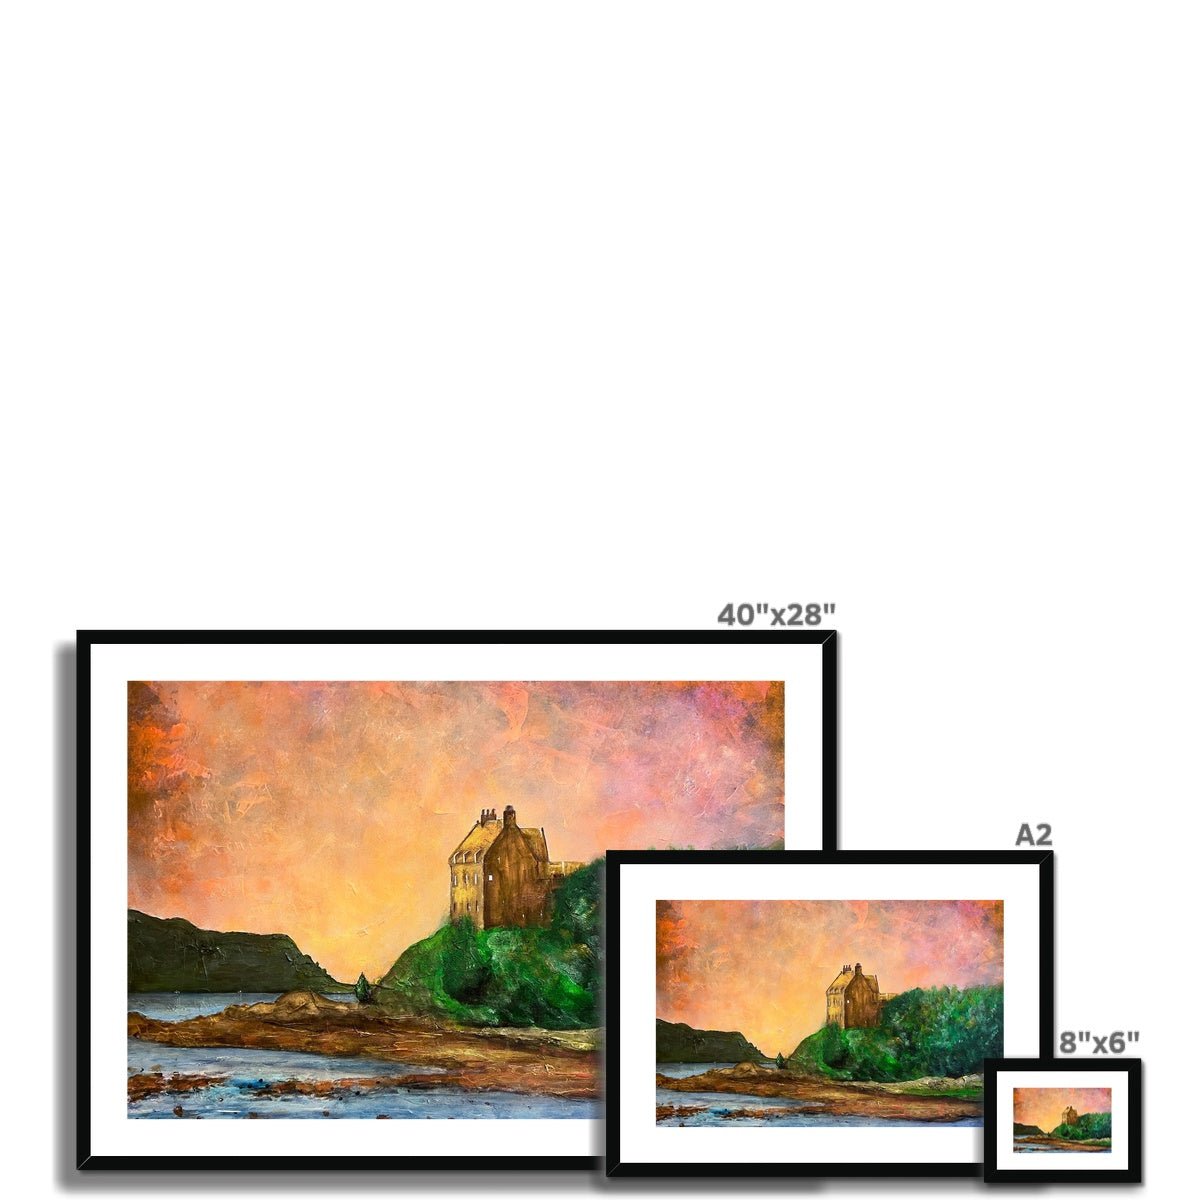 Duntrune Castle Painting | Framed & Mounted Prints From Scotland-Framed & Mounted Prints-Historic & Iconic Scotland Art Gallery-Paintings, Prints, Homeware, Art Gifts From Scotland By Scottish Artist Kevin Hunter